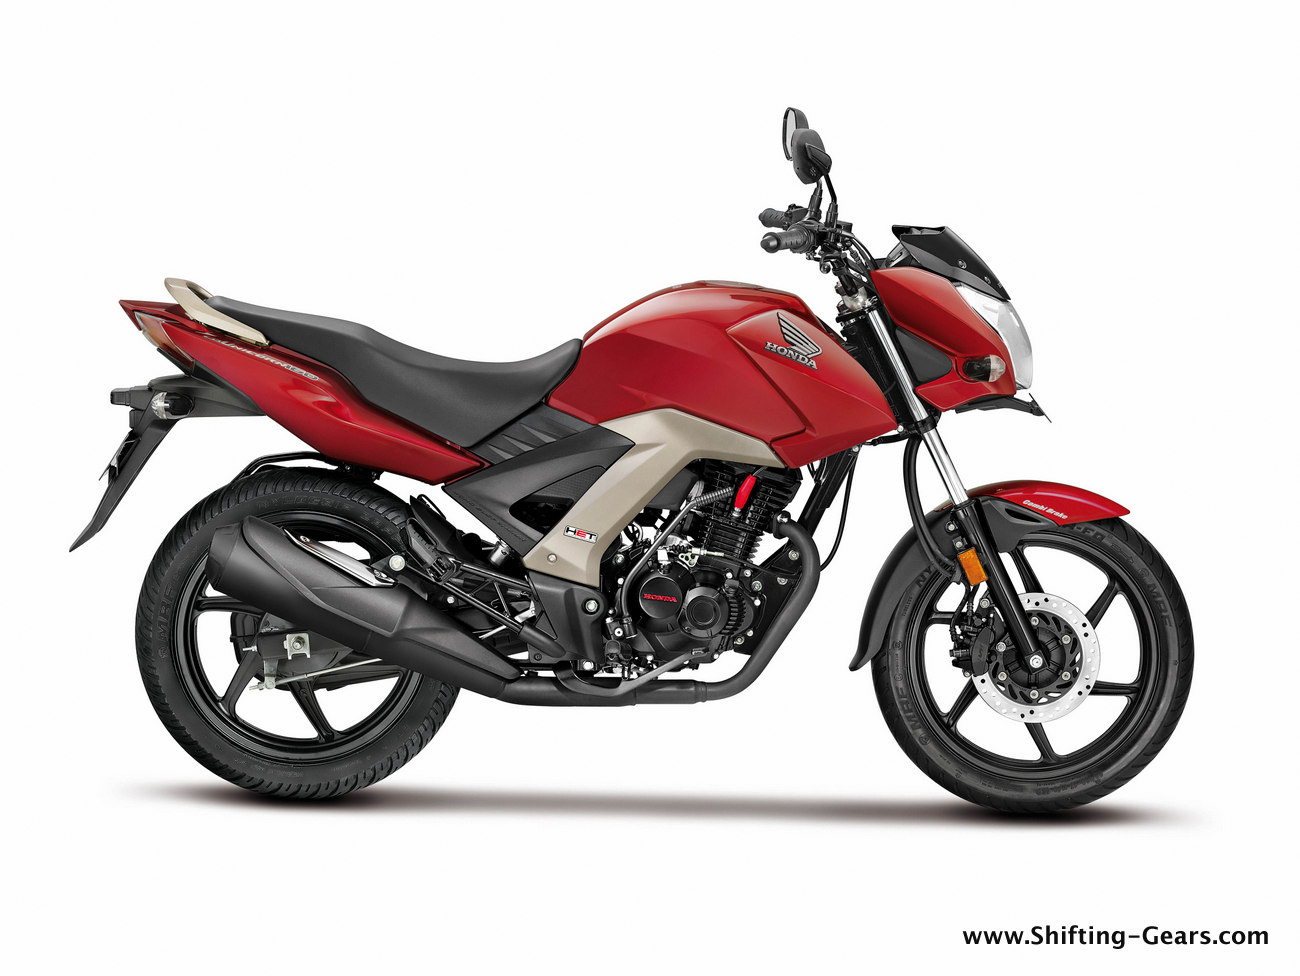 Honda CB Unicorn 160 deliveries from mid-January '15 | Shifting-Gears